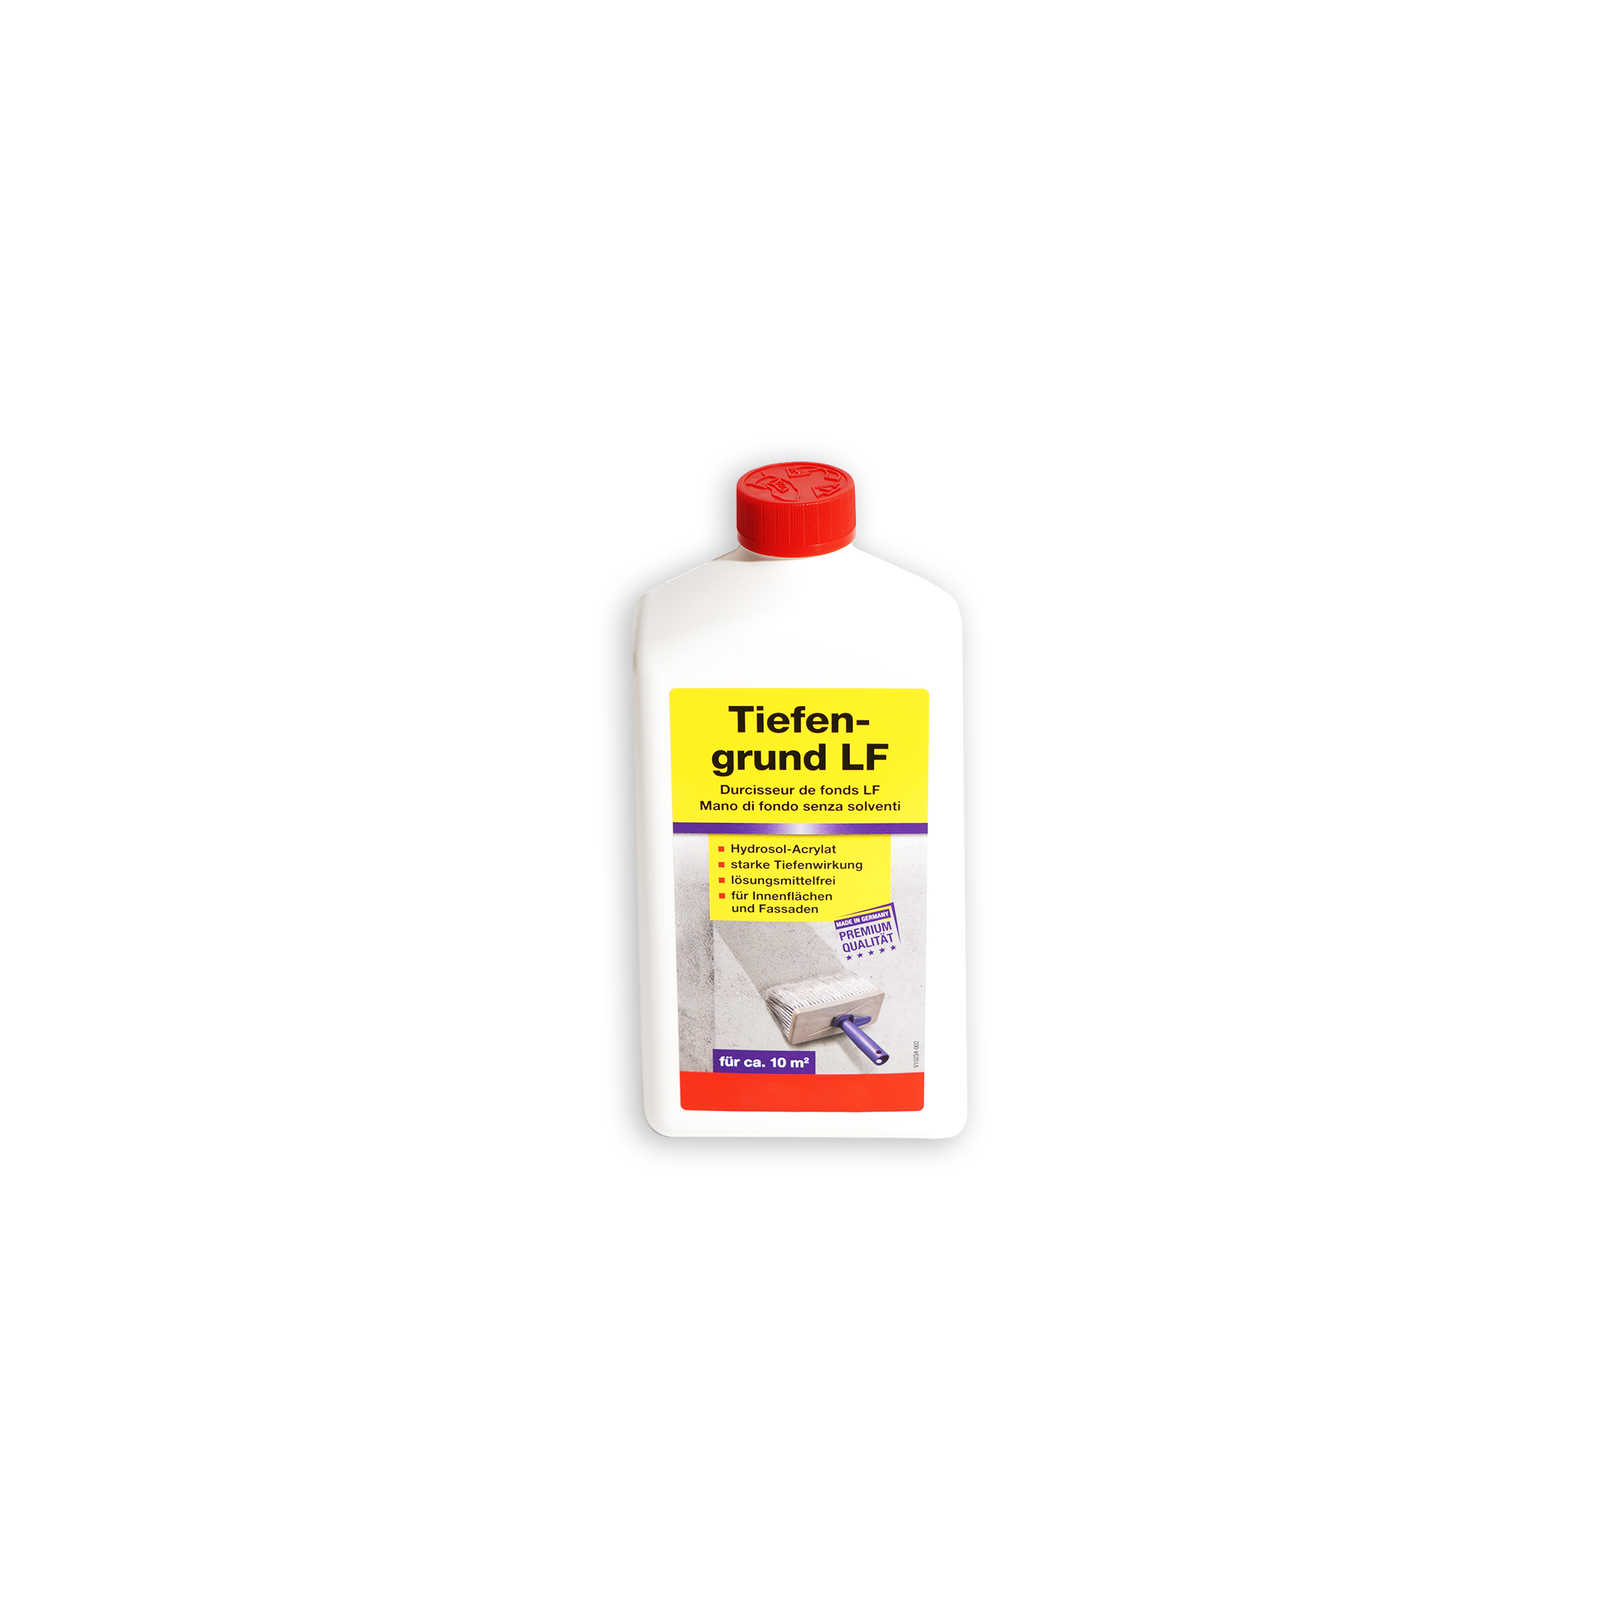 Tiefengrung 1L, for priming wall surfaces
